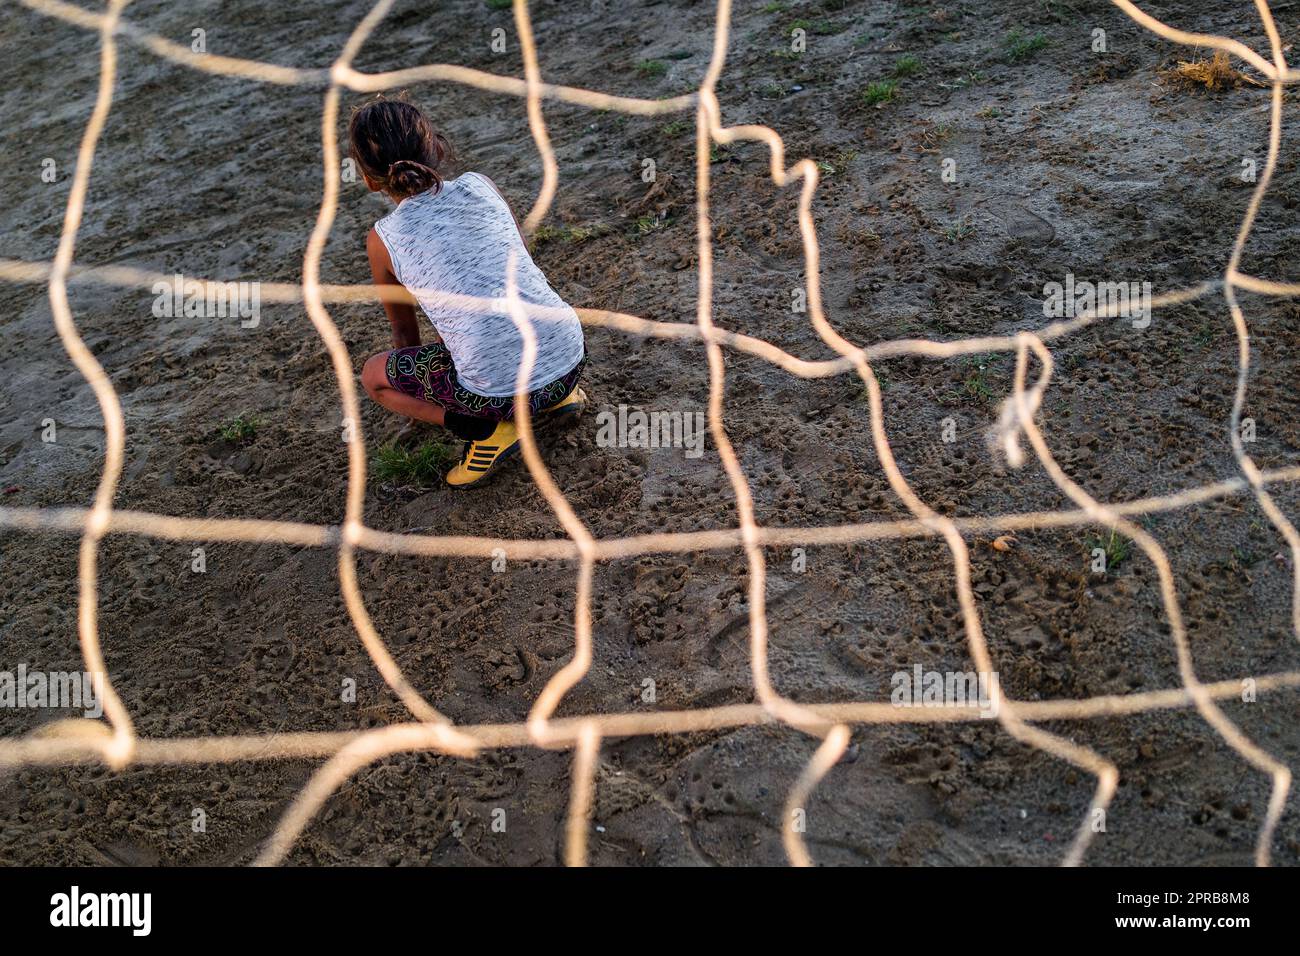 A young Colombian female football player sits inside the goal during a training session on a dirt playing field in Necoclí, Antioquia, Colombia. Stock Photo